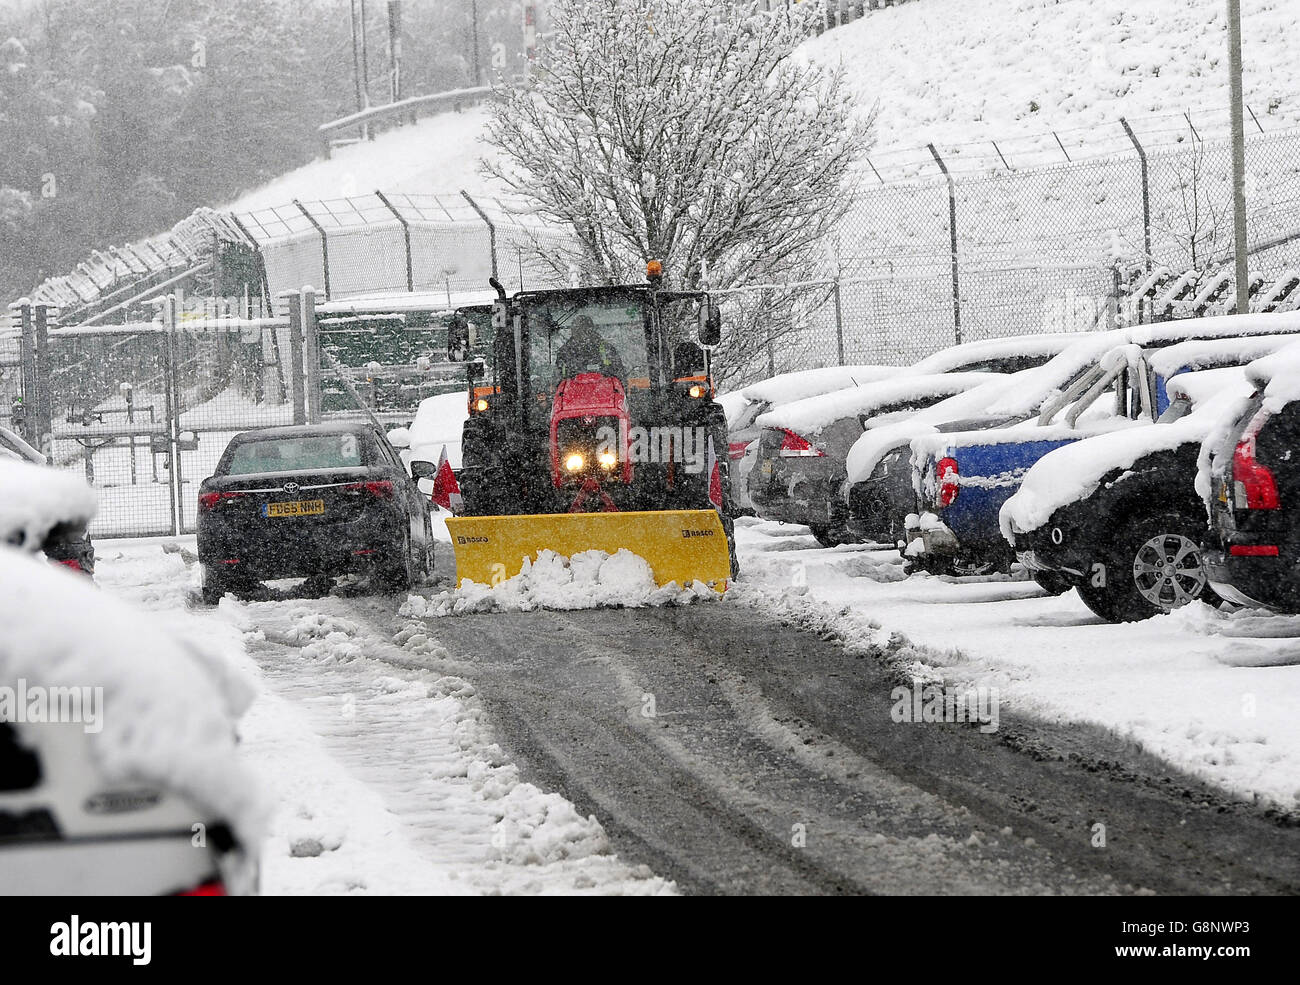 A tractor clears snow close to Leeds Bradford Airport which was forced to close while crews worked to clear the runway, as parts of the UK woke up to almost four inches of snow on Friday morning as March continues to feel more like winter than spring. Stock Photo